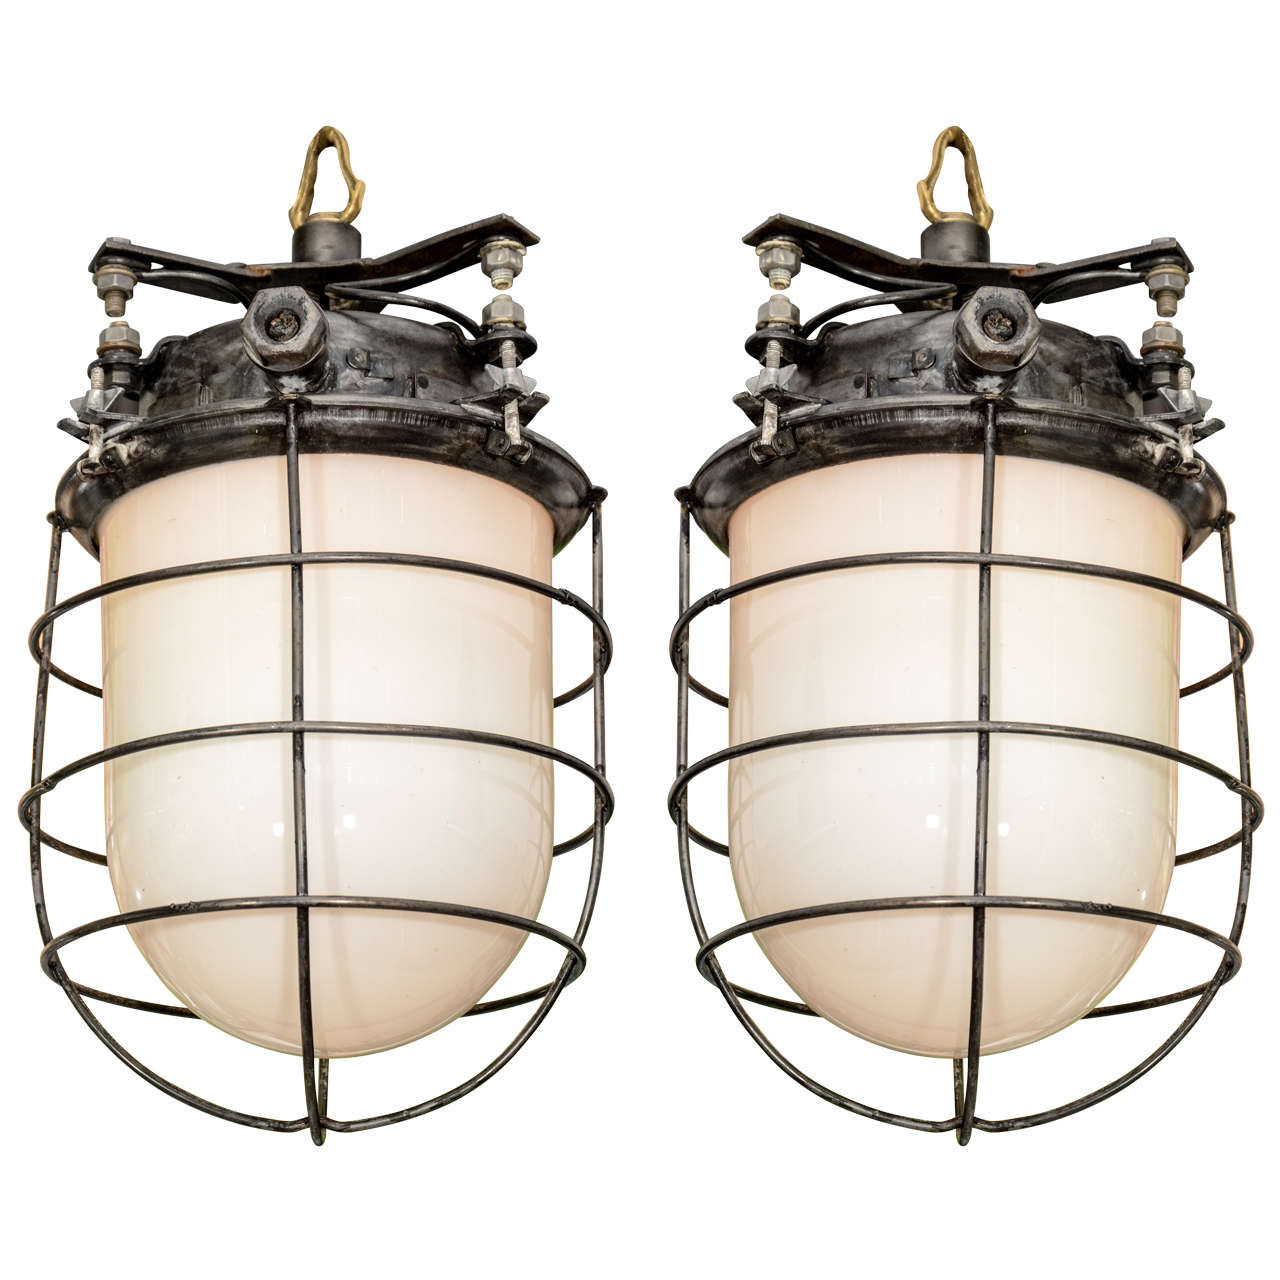 USA Pair of Ship Galley Caged Pendant Lights